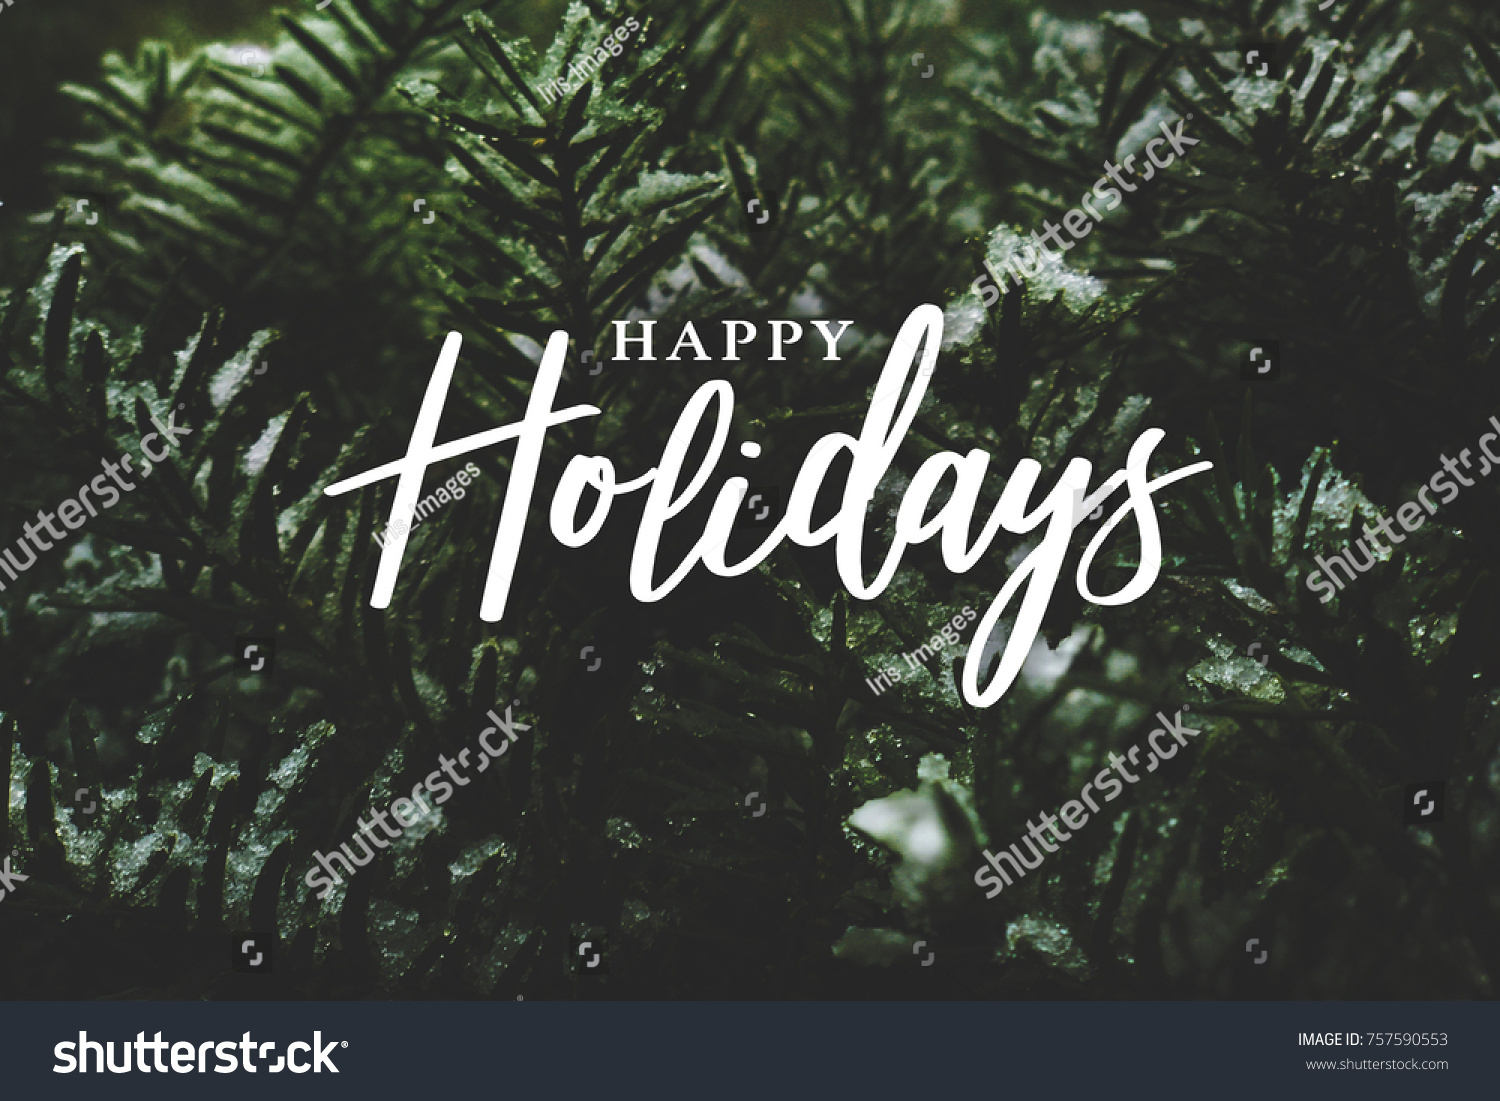 Happy Holidays Text Over Winter Evergreen Branches Covered in Snow #757590553